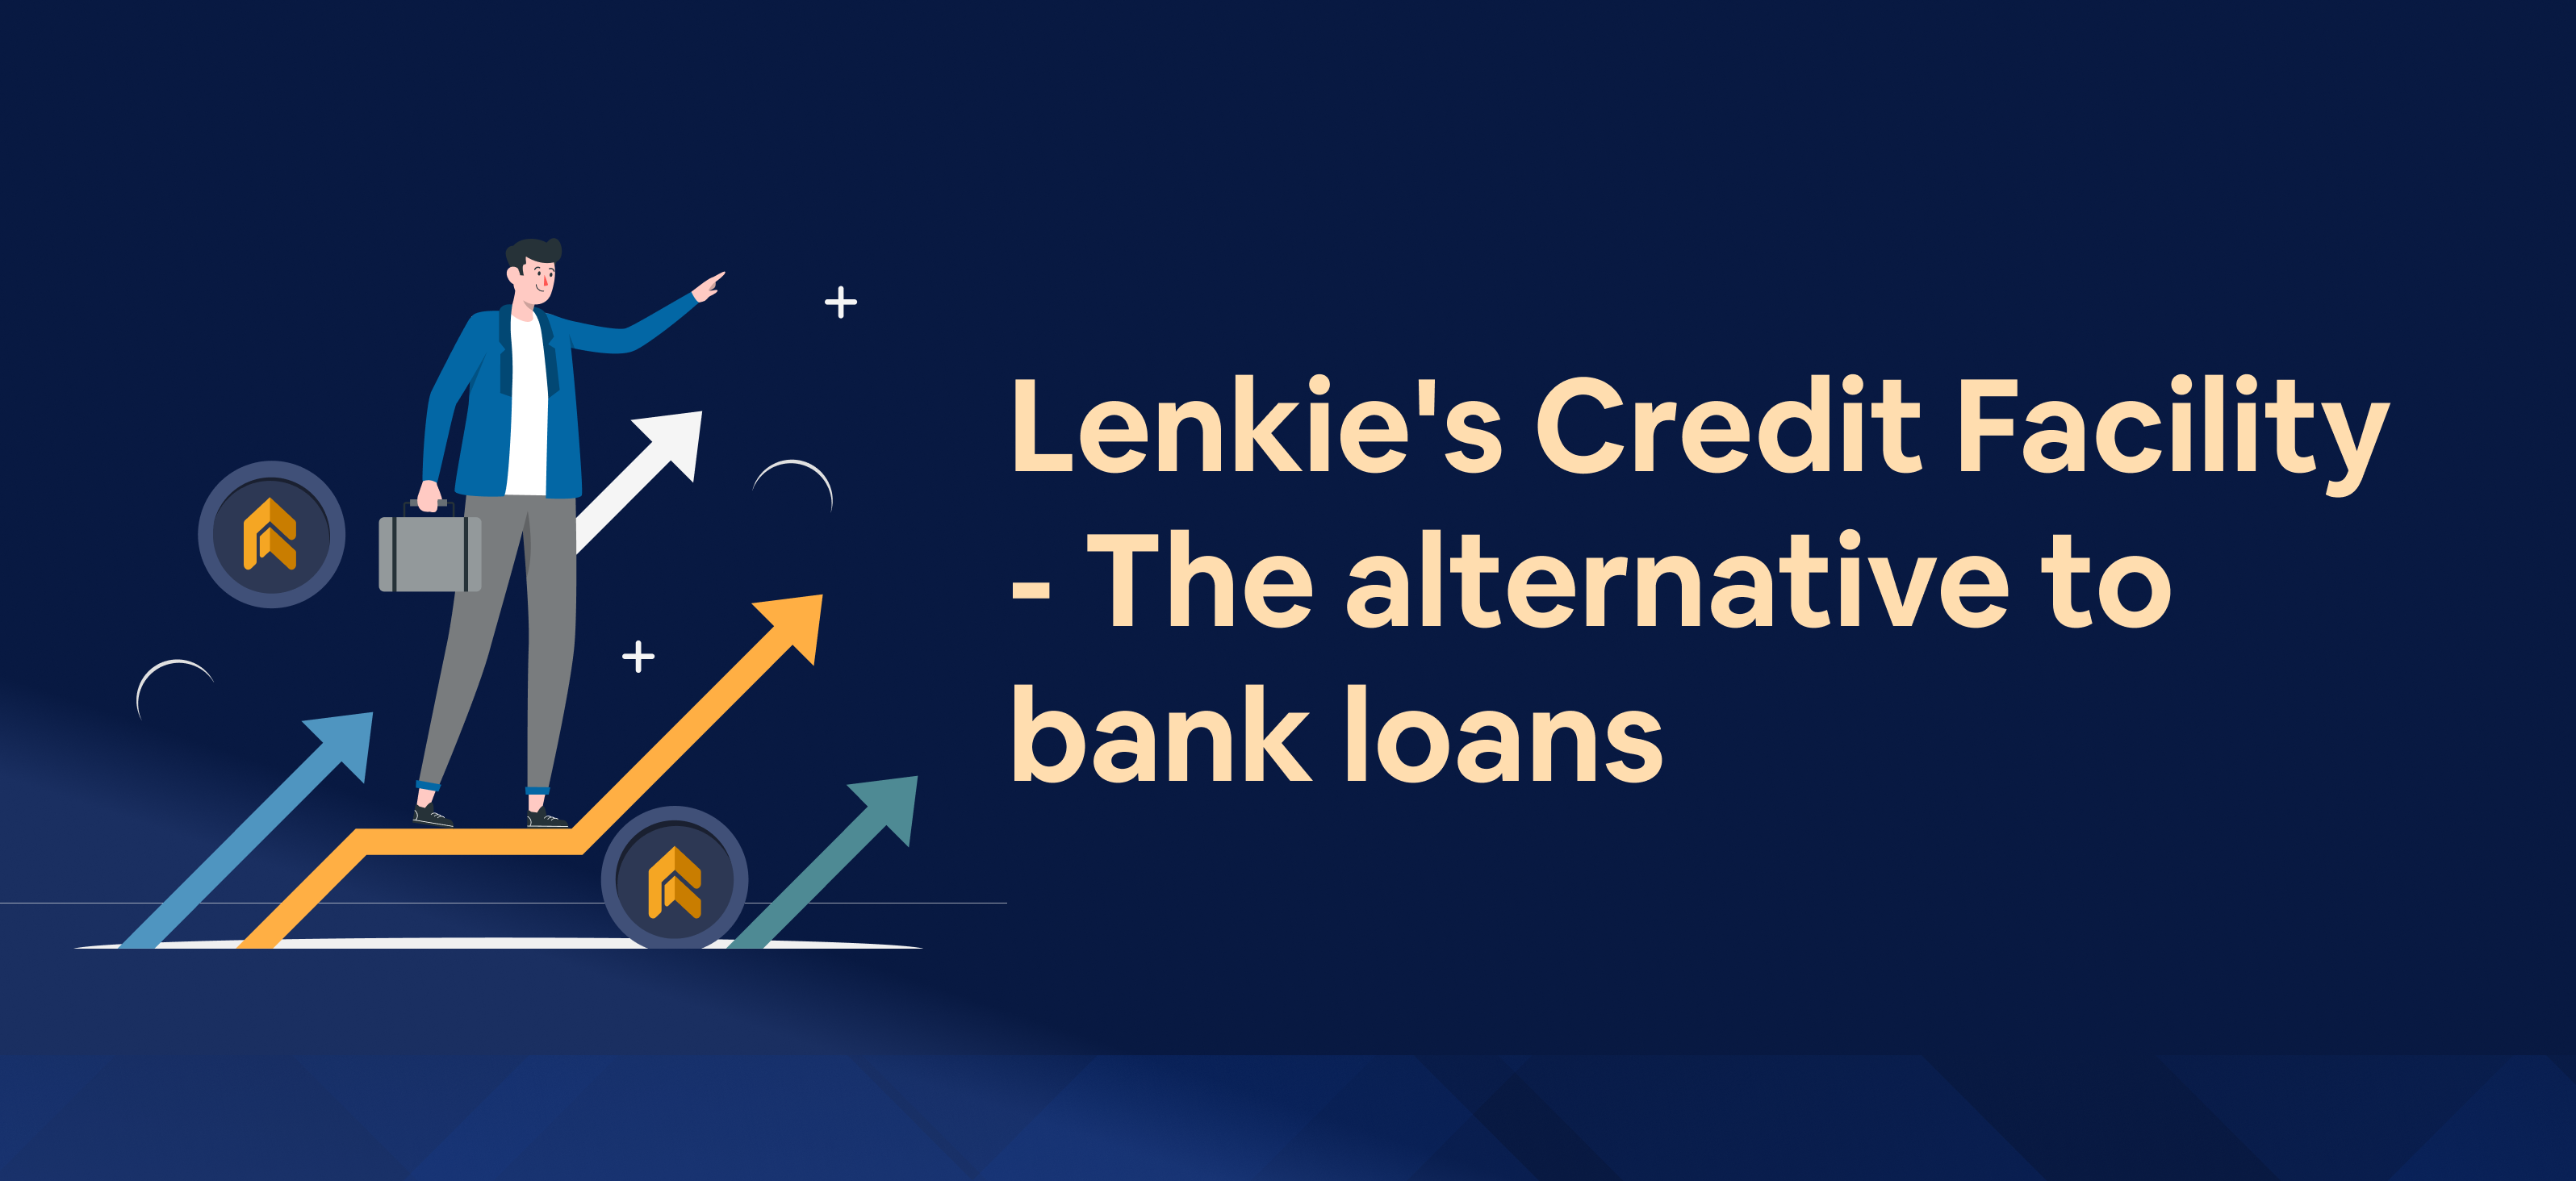 Lenkie's Credit Facility: The alternative to bank loans 